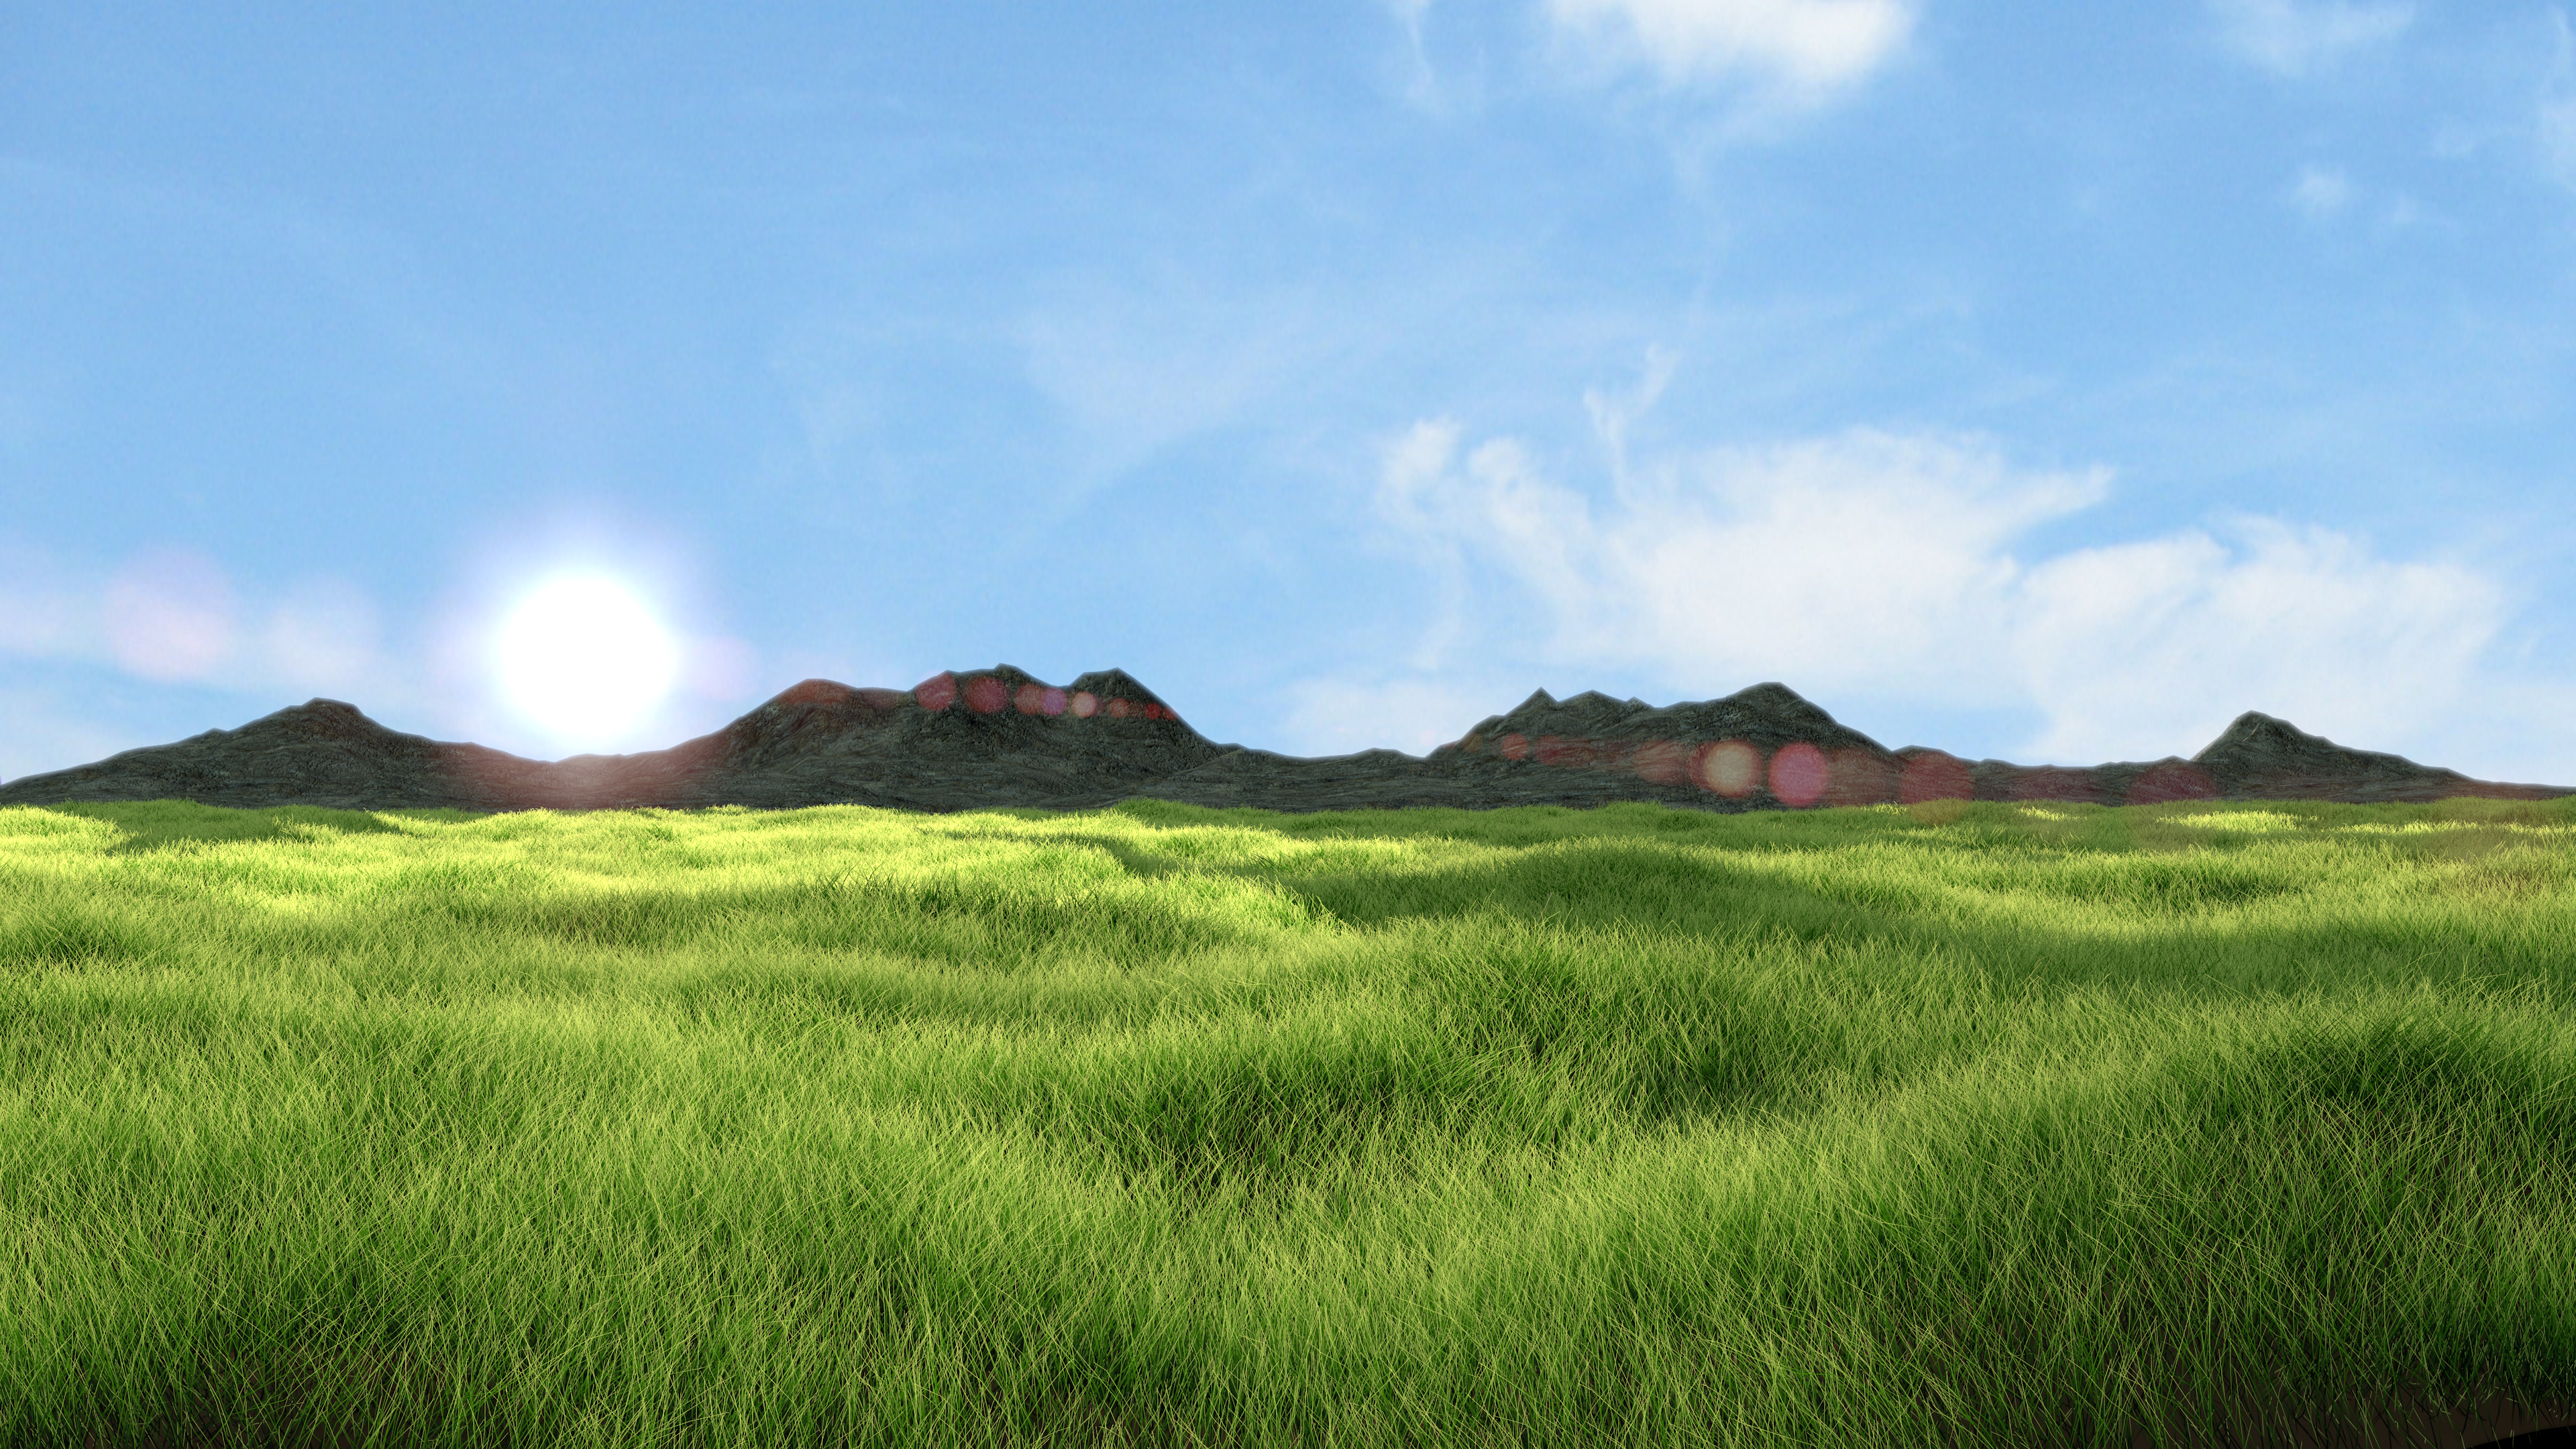 Grassy Meadow by TheWizardLord on DeviantArt